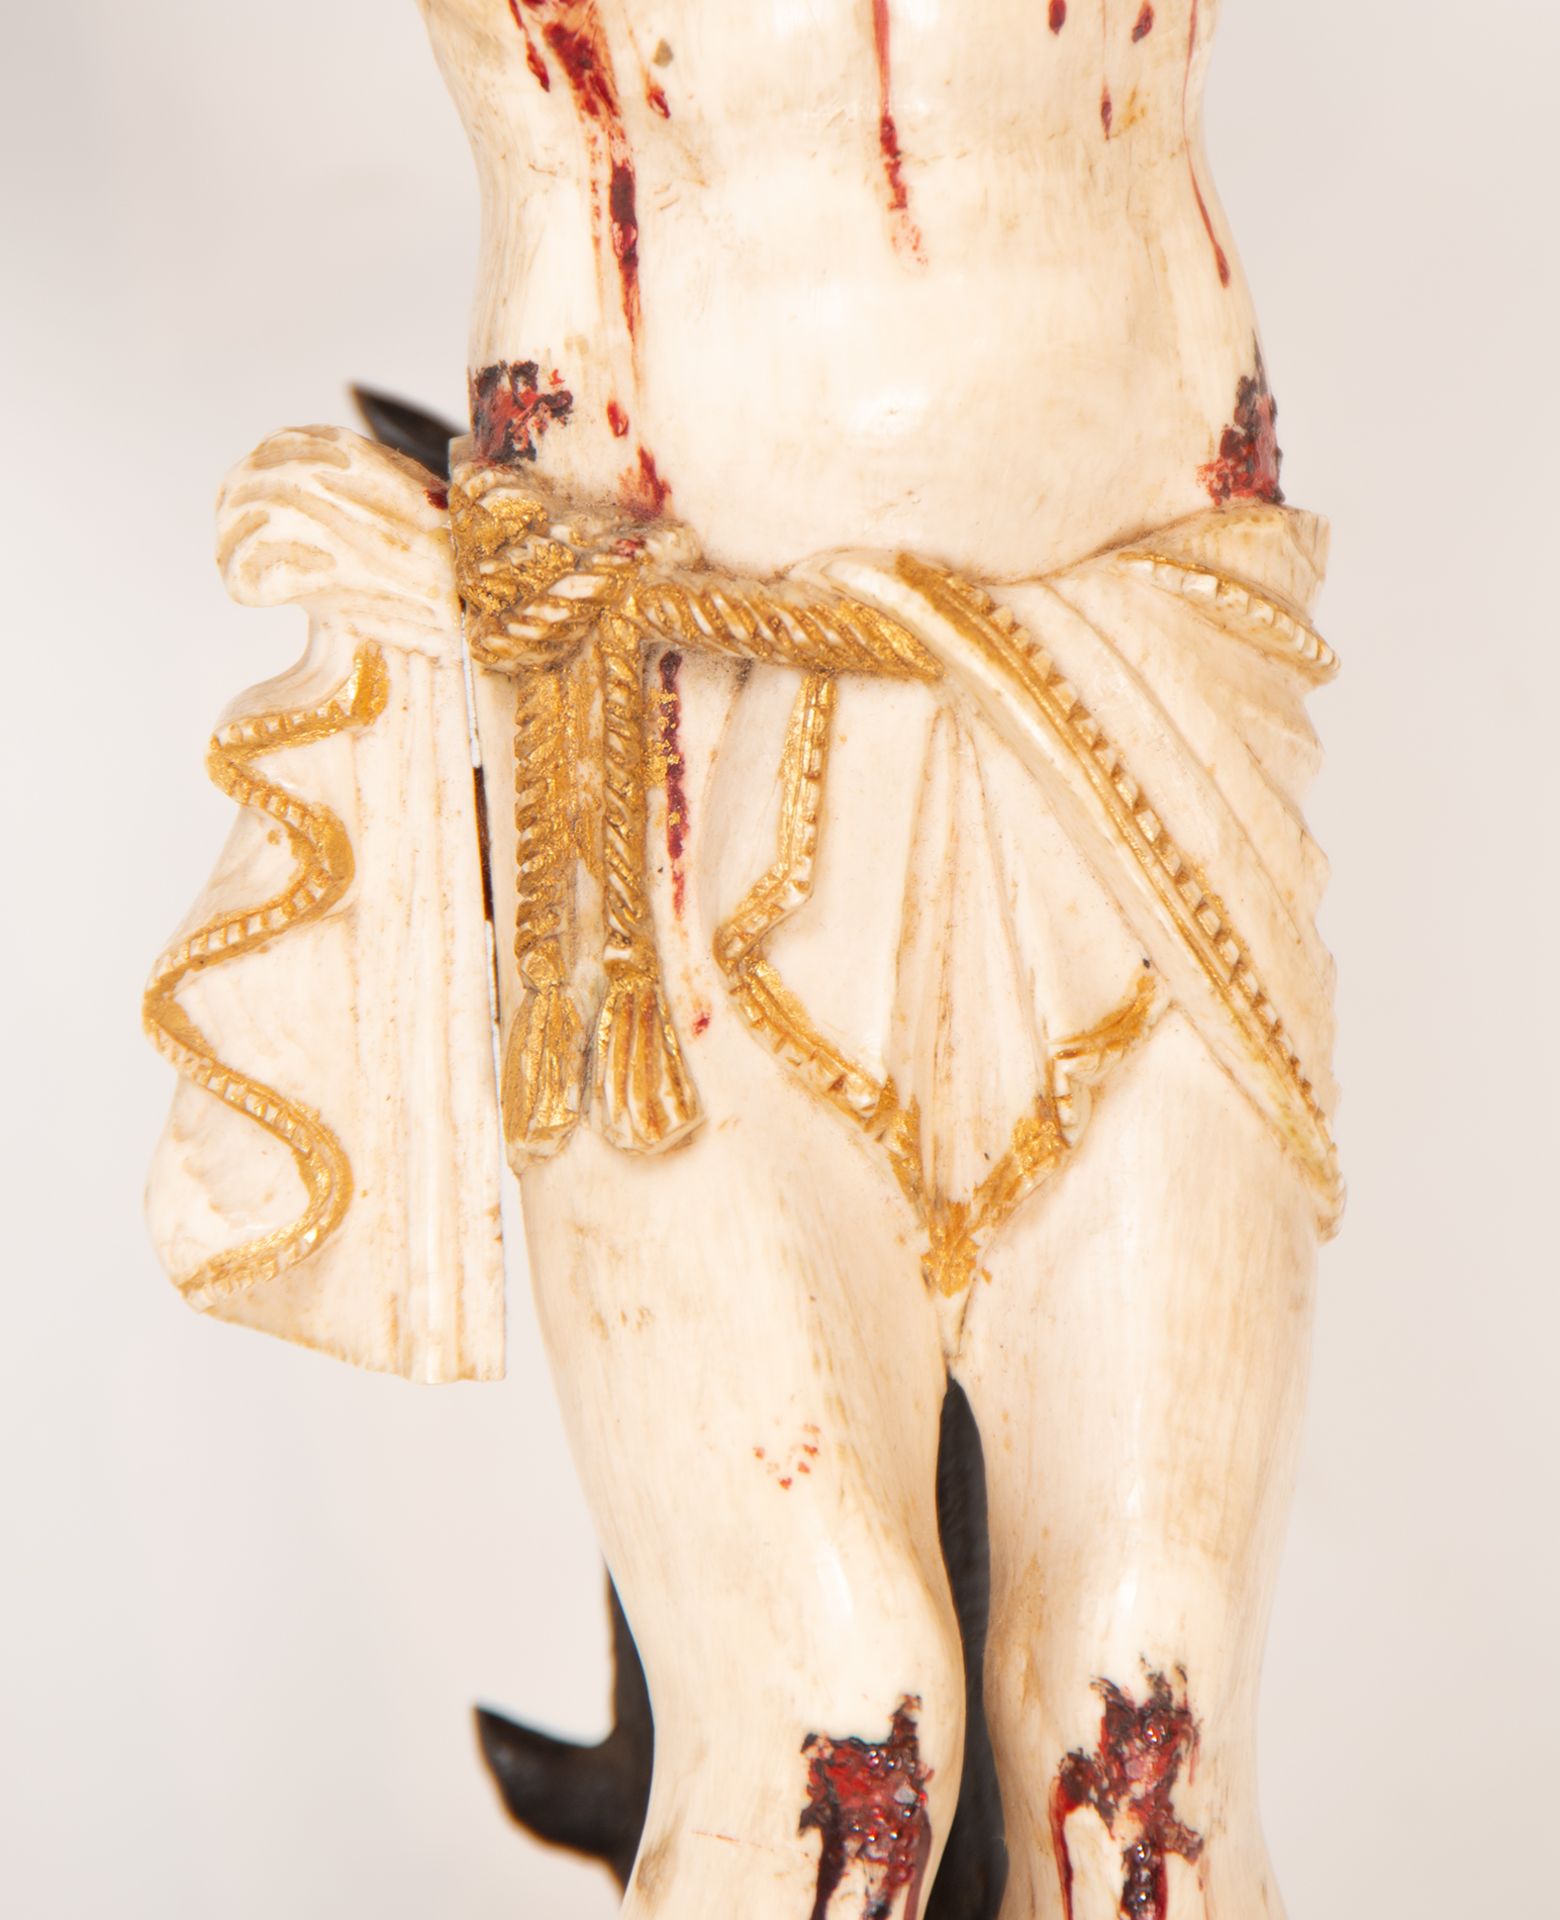 Important Indo Portuguese Ivory Christ, 17th century - Image 3 of 6